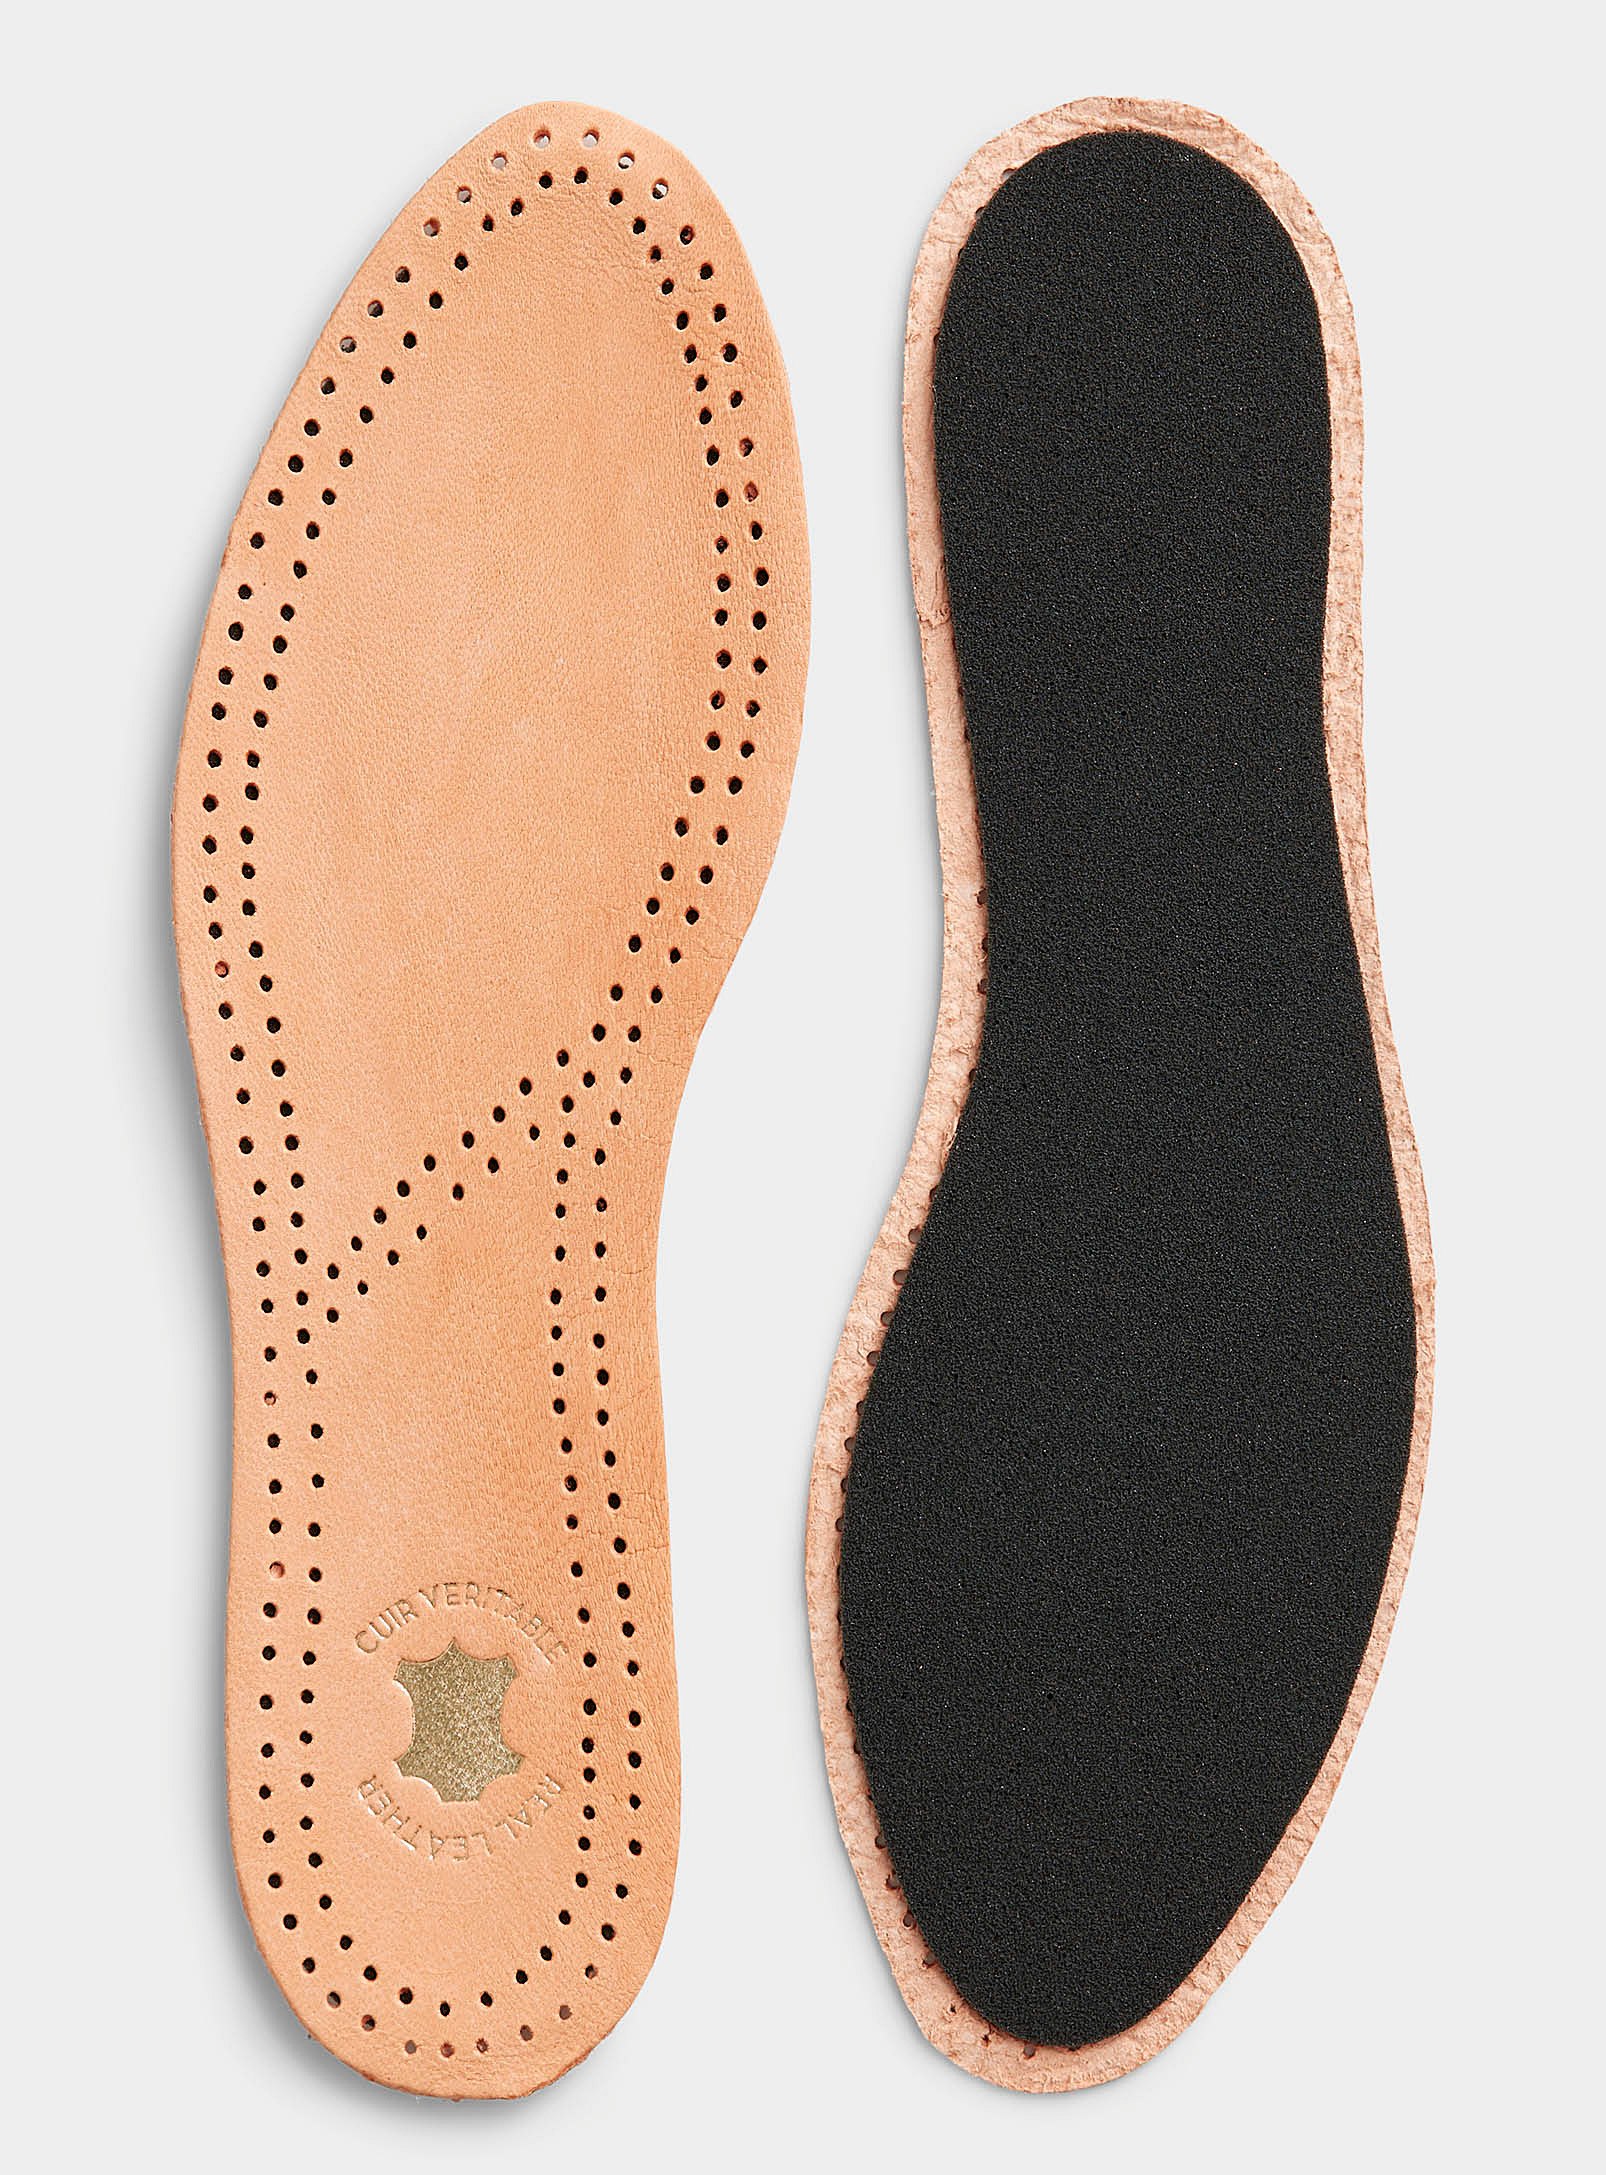 Walter's - Women's Genuine leather insole